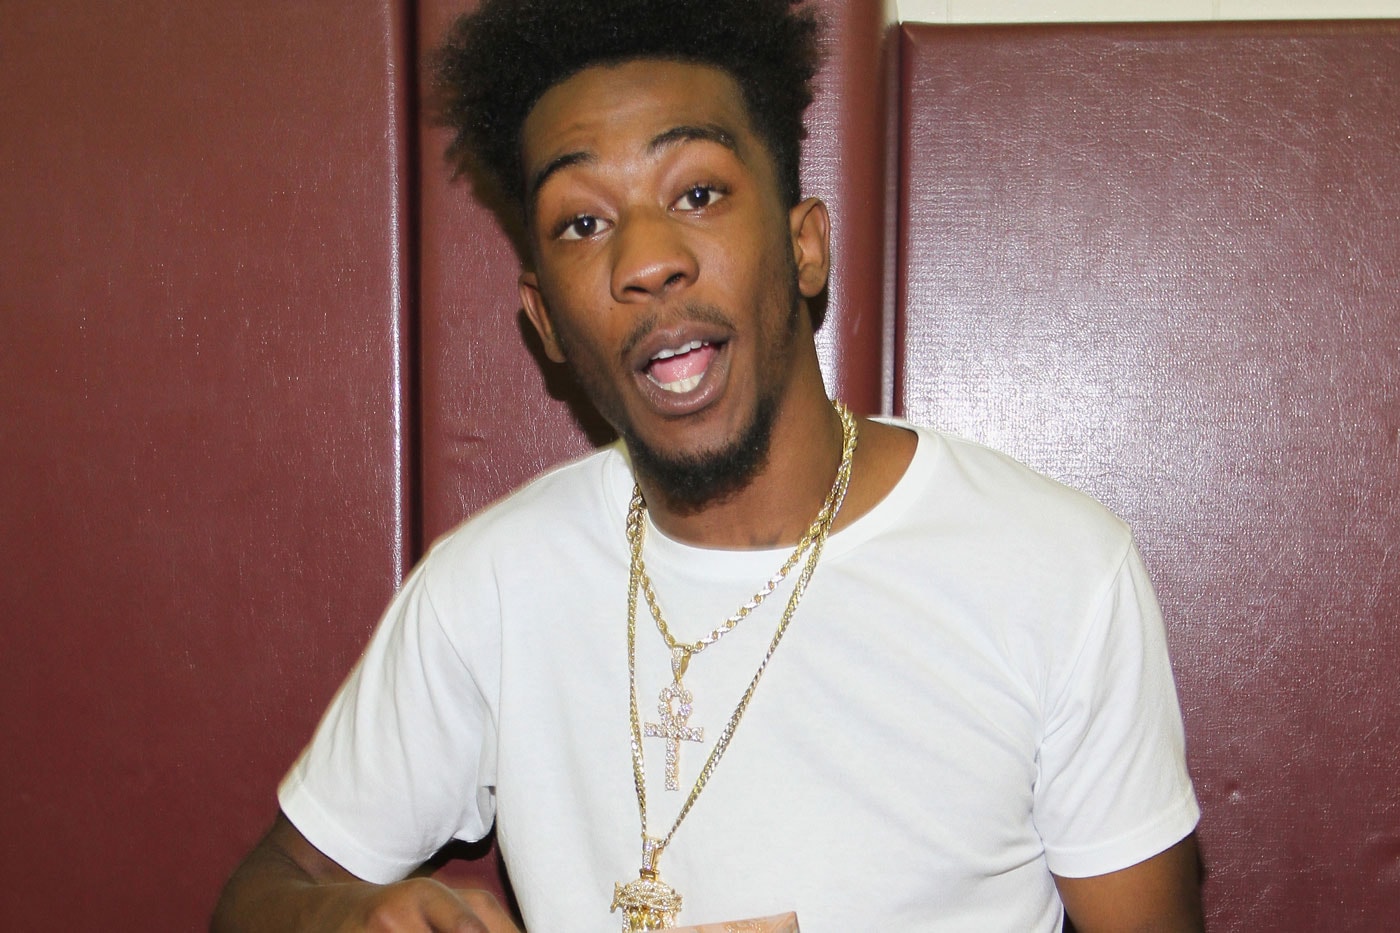 Watch Desiigner Rapping "NYC Style" in Pre-"Panda" Clip